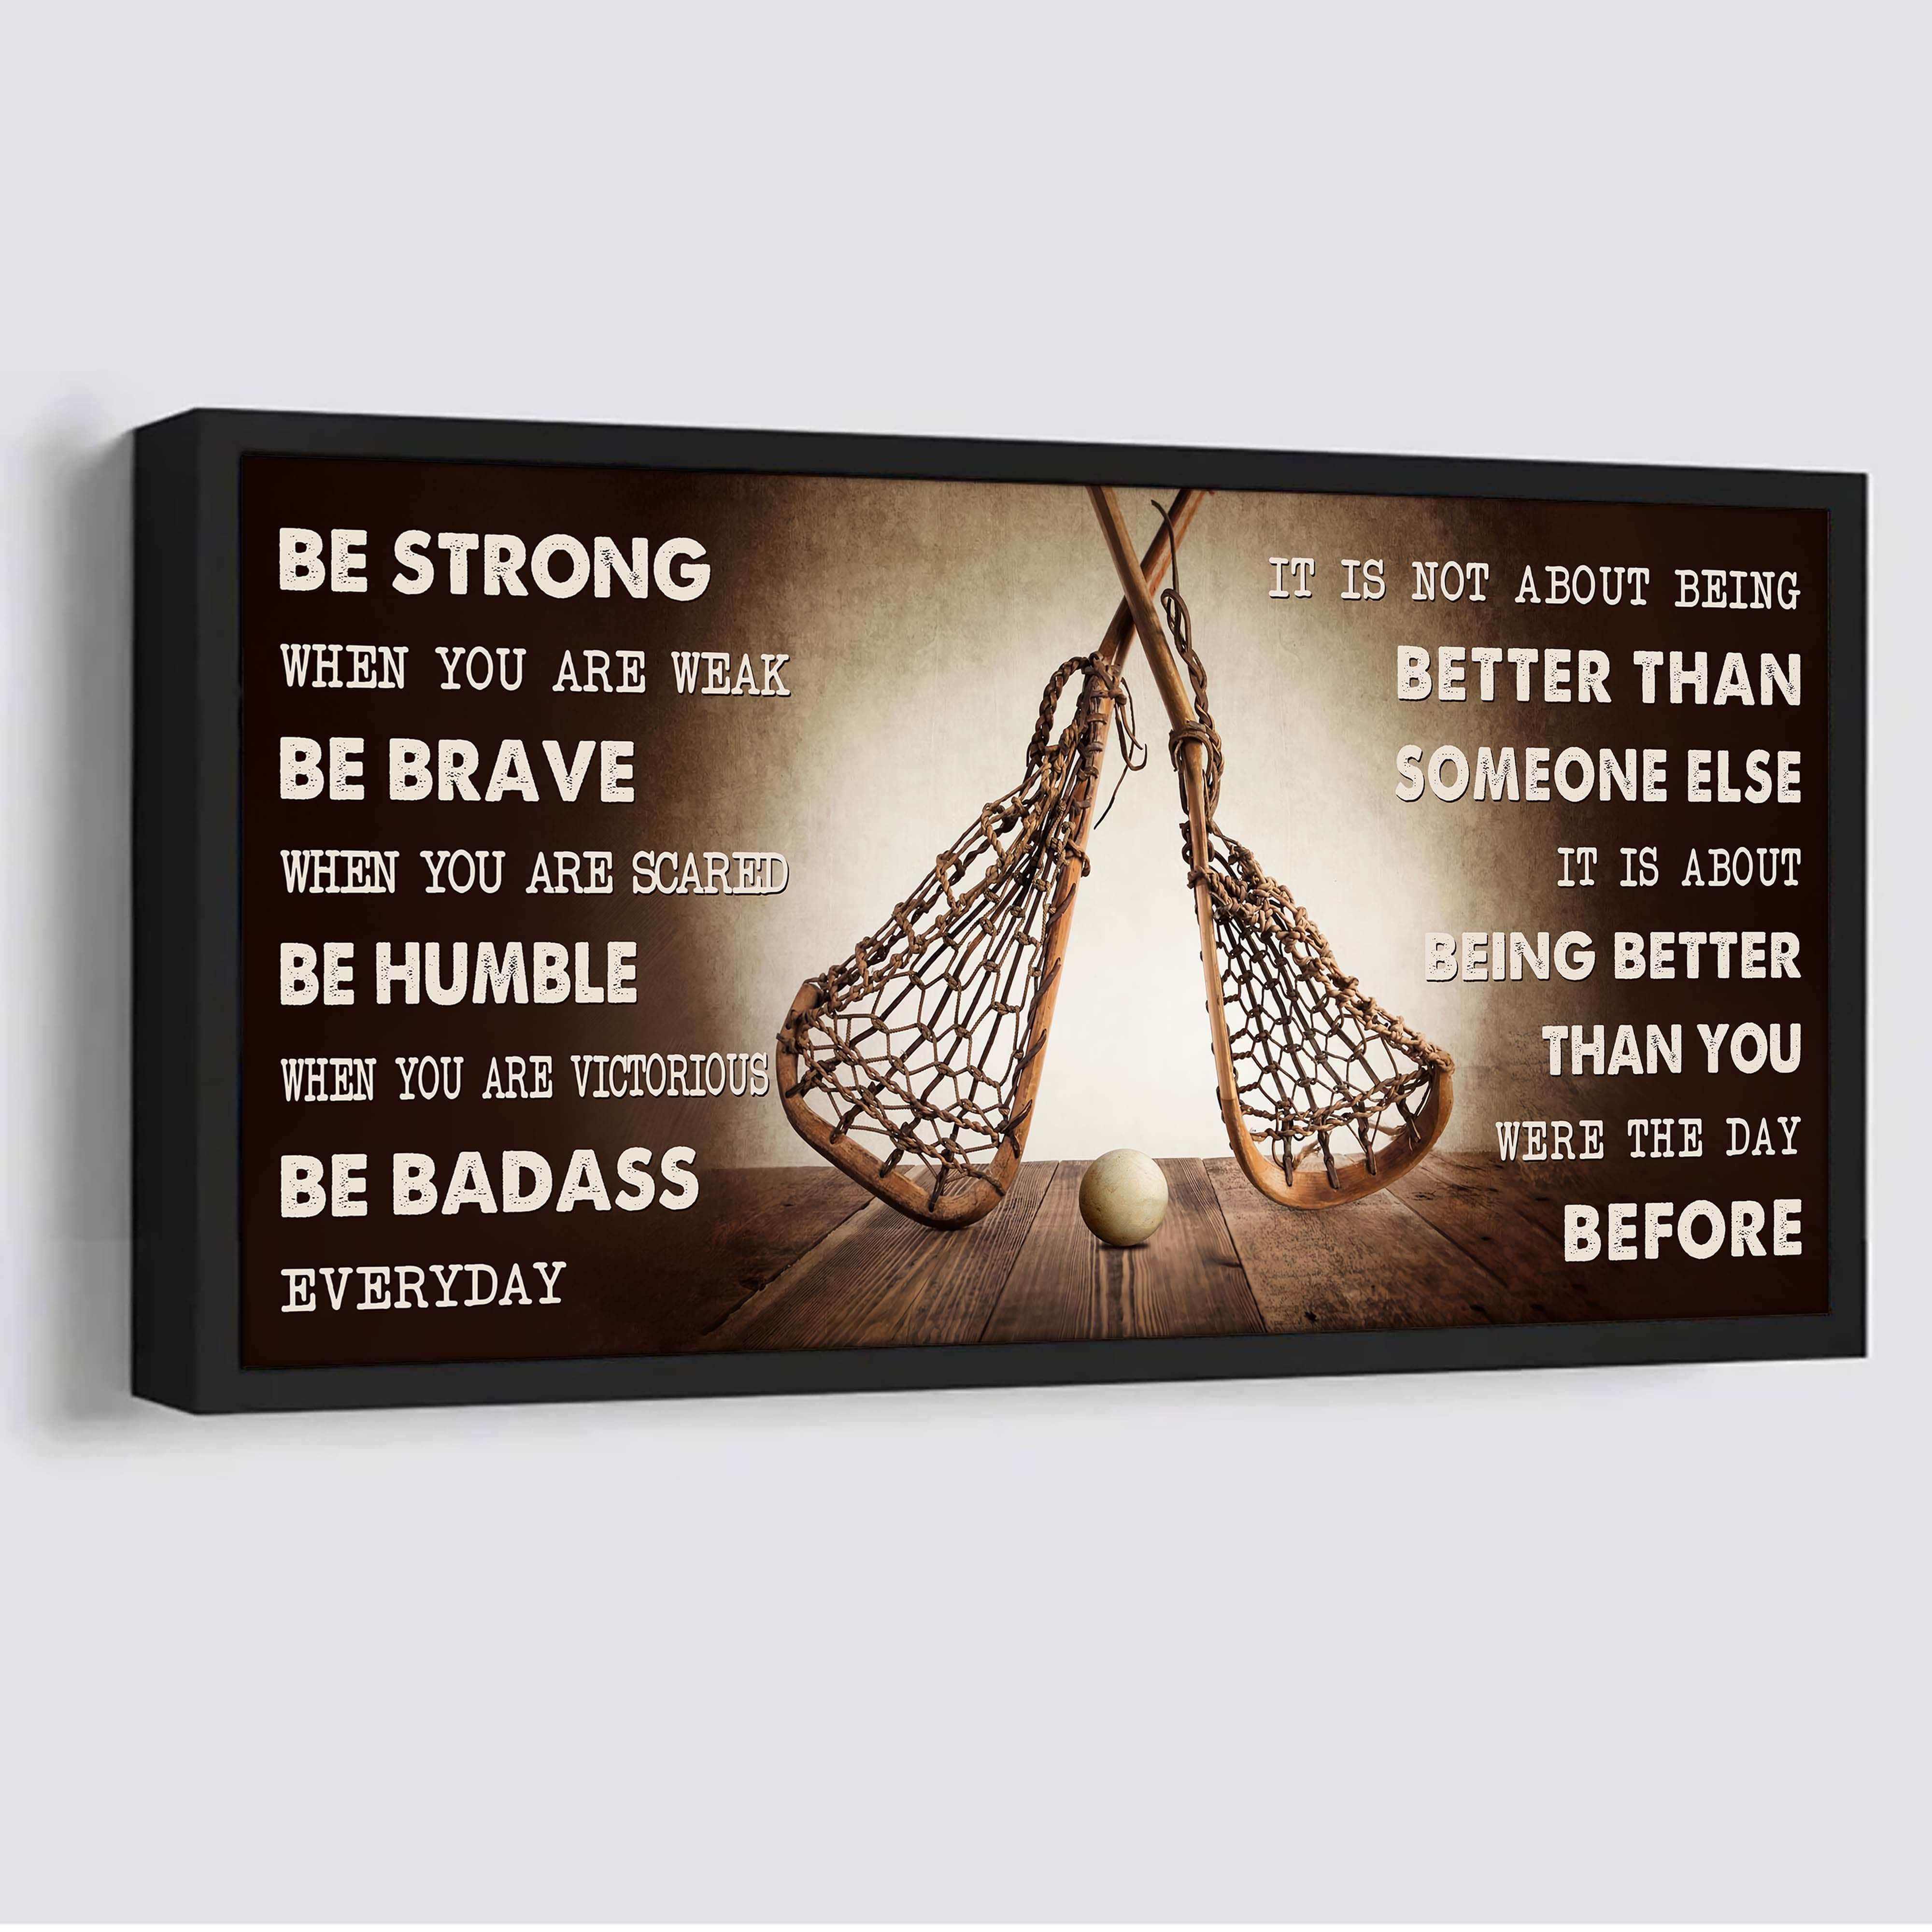 Lacrosse Poster It Is Not About Being Better Than Someone Else - Be Strong When You Are Weak